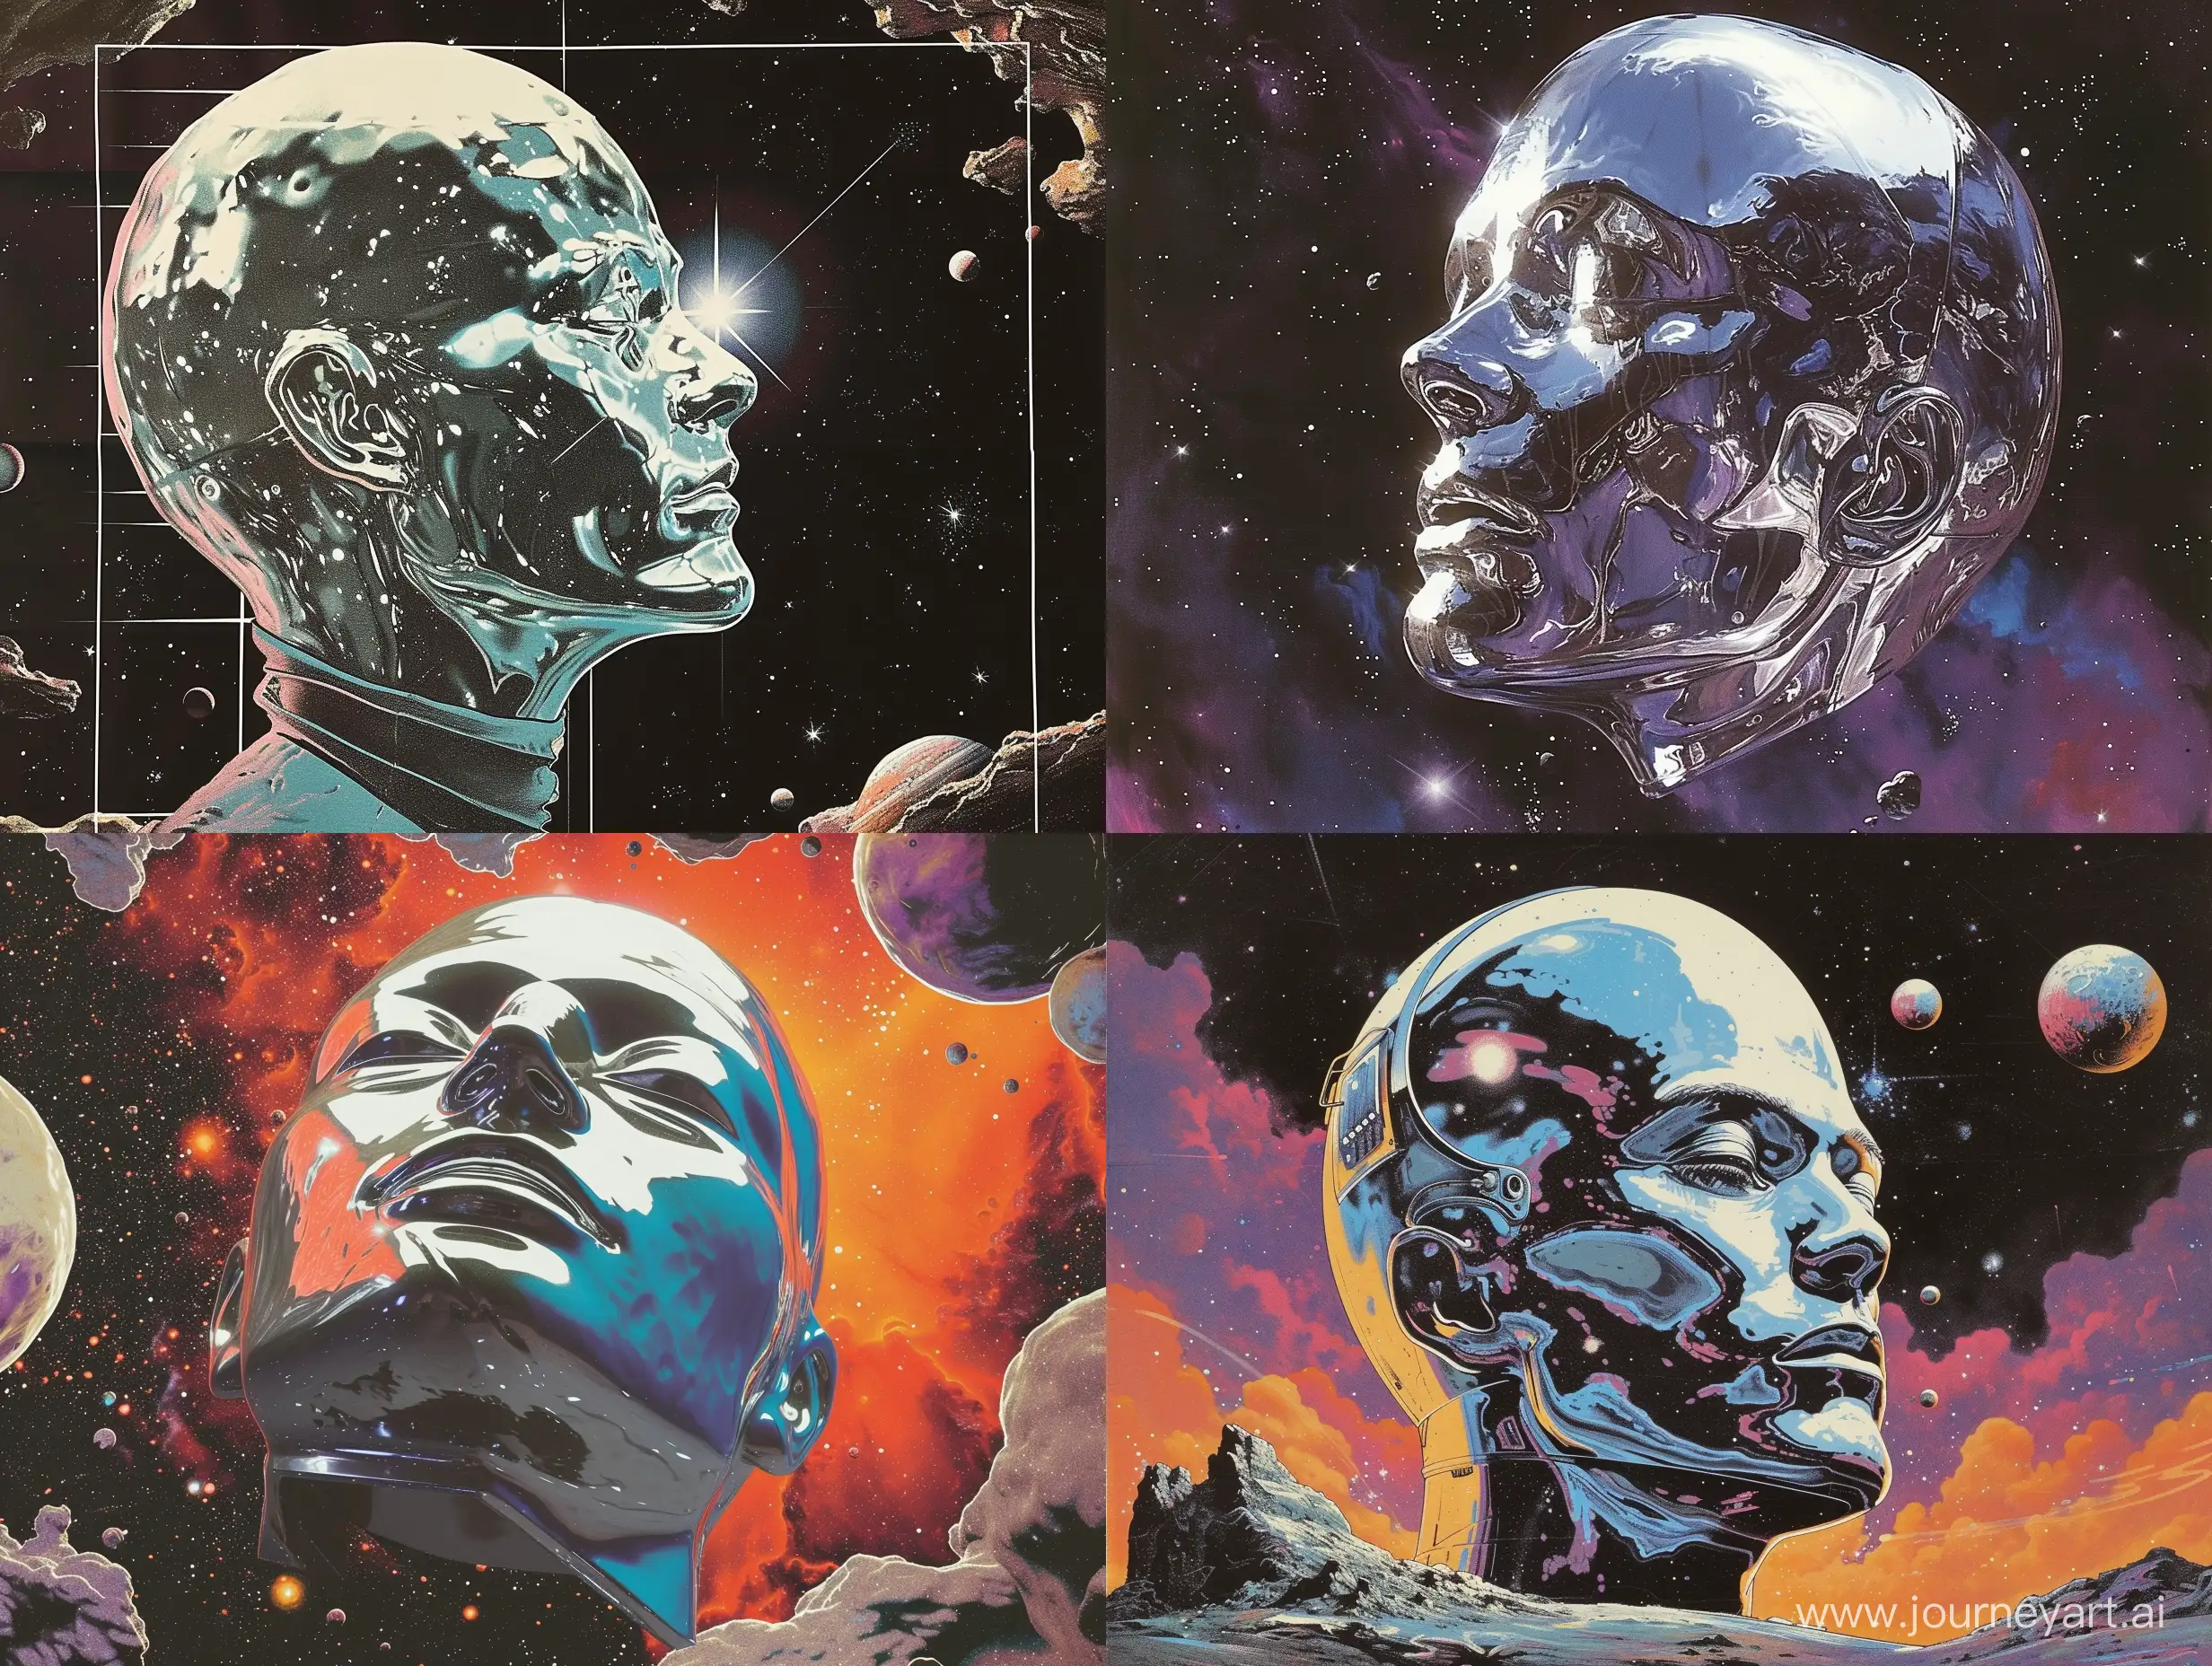 Surreal-Space-Artwork-Giant-Silver-Head-in-Vintage-Synthwave-Aesthetic